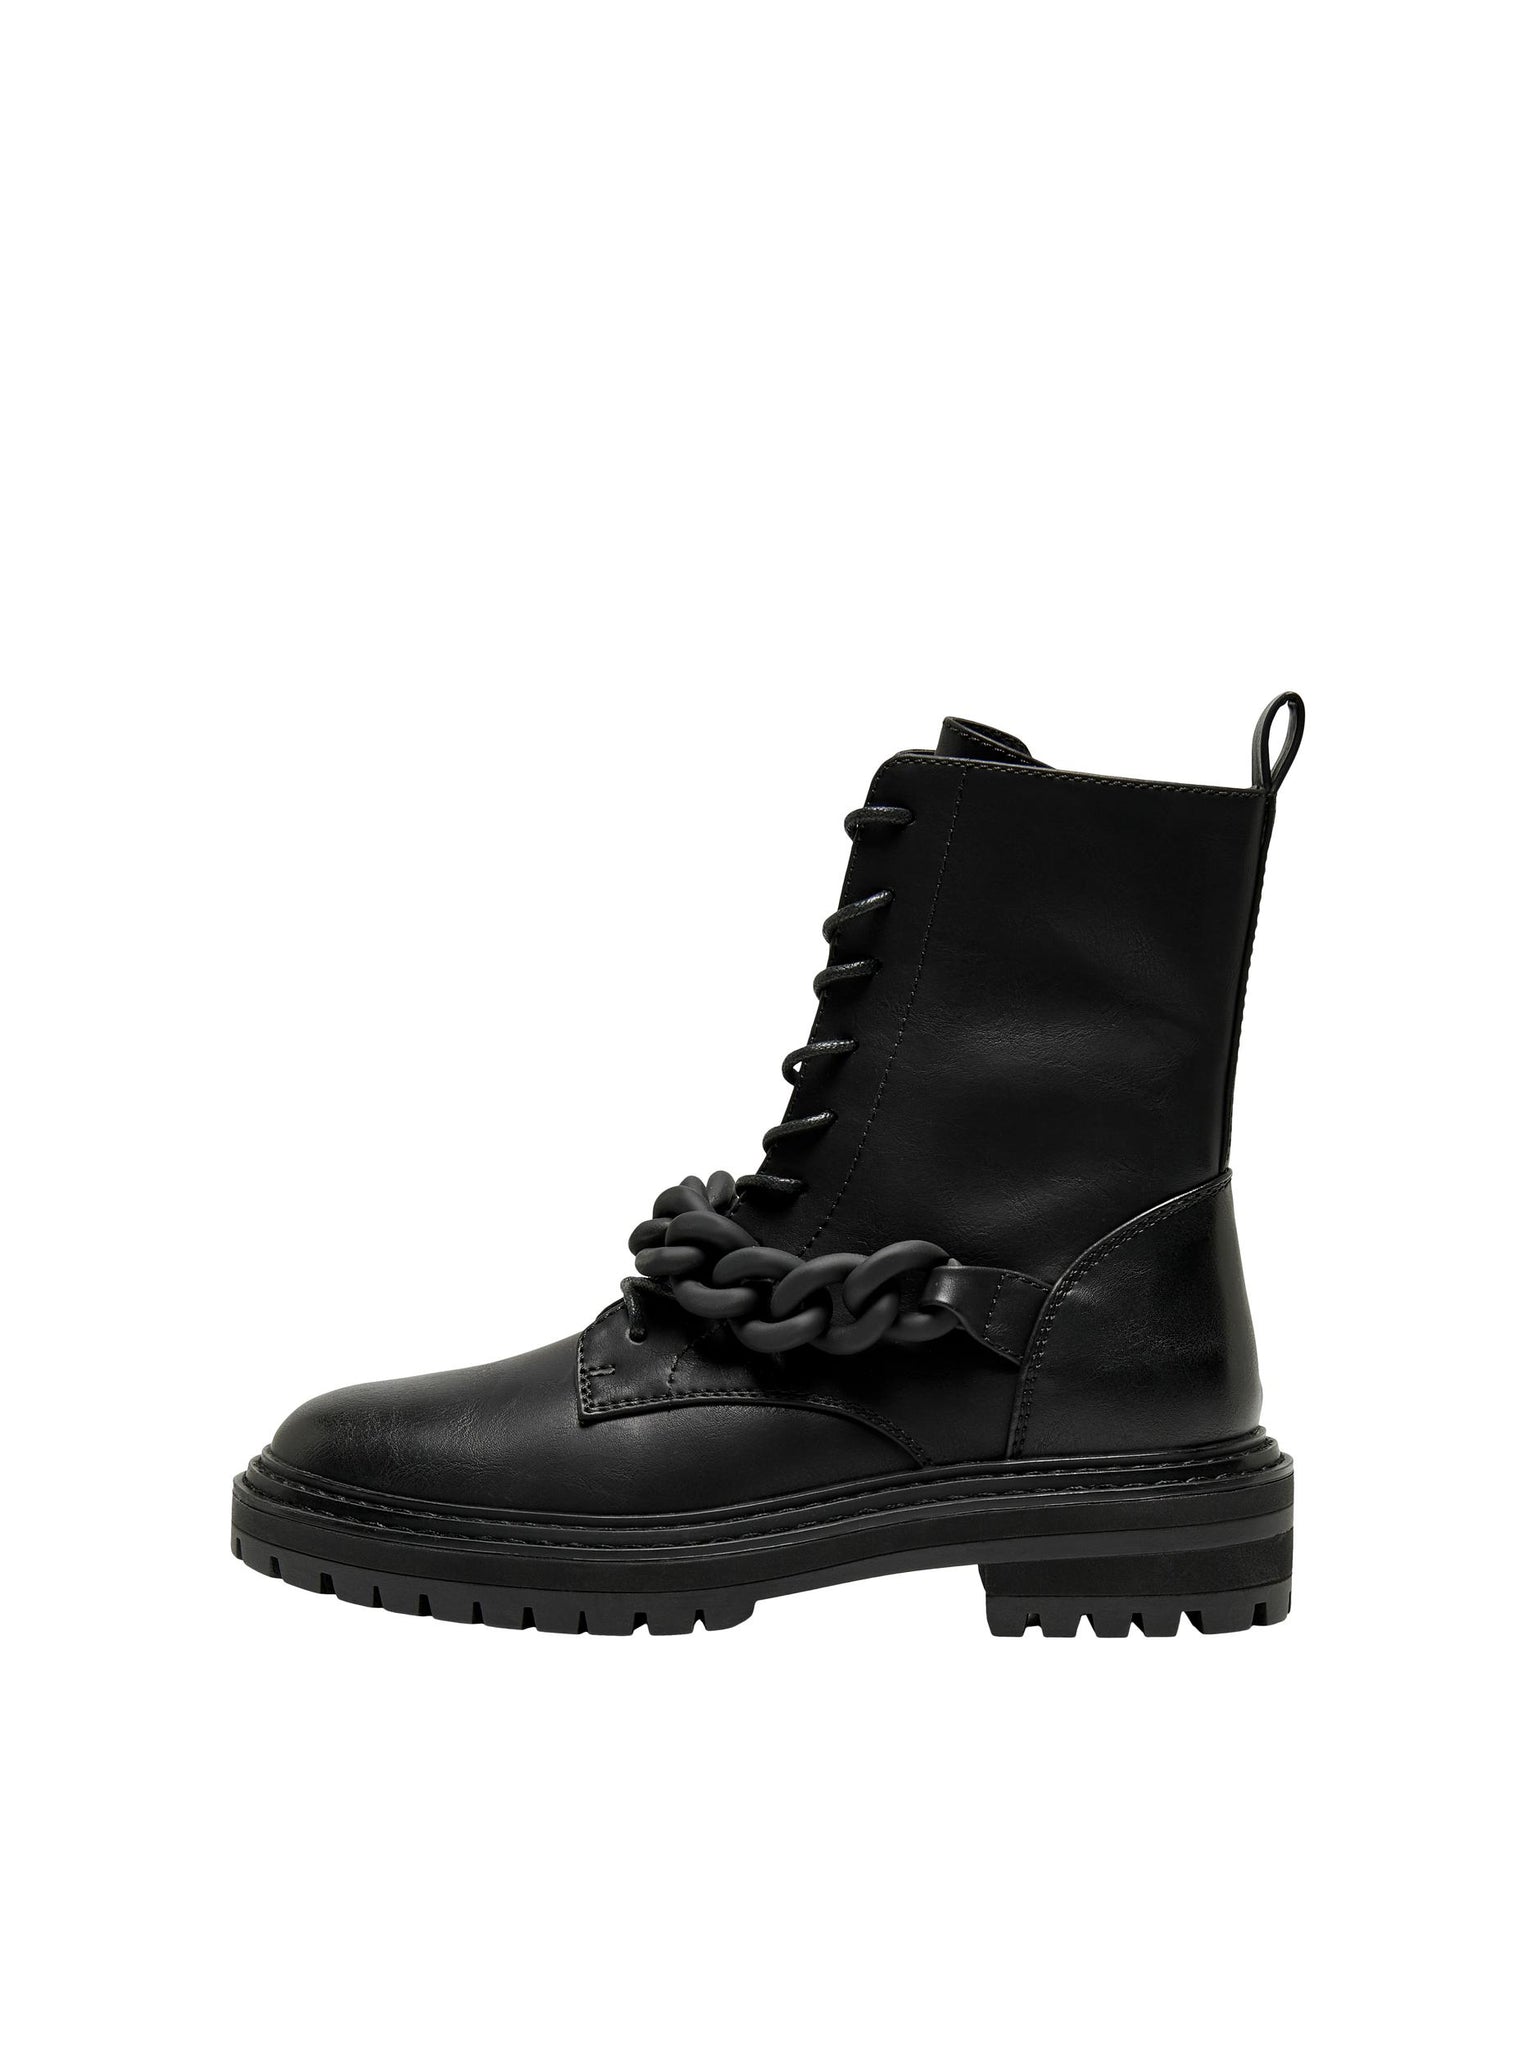 Only PU Chain Boots in Black